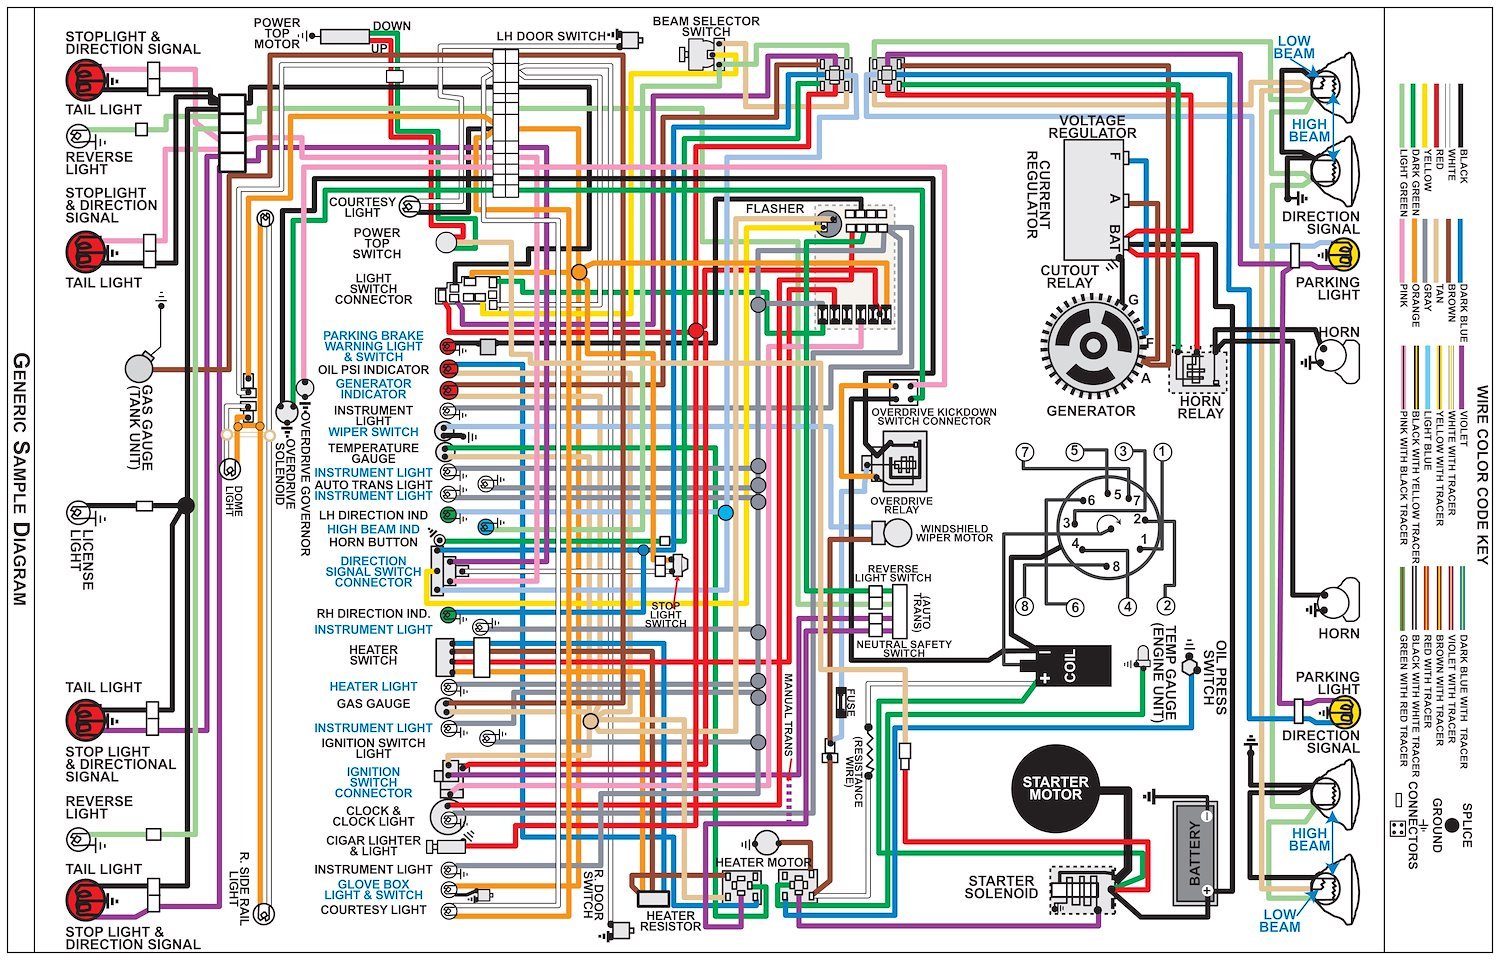 Wiring Diagram for 1967 Ford Falcon, 11 in x 17 in., Laminated